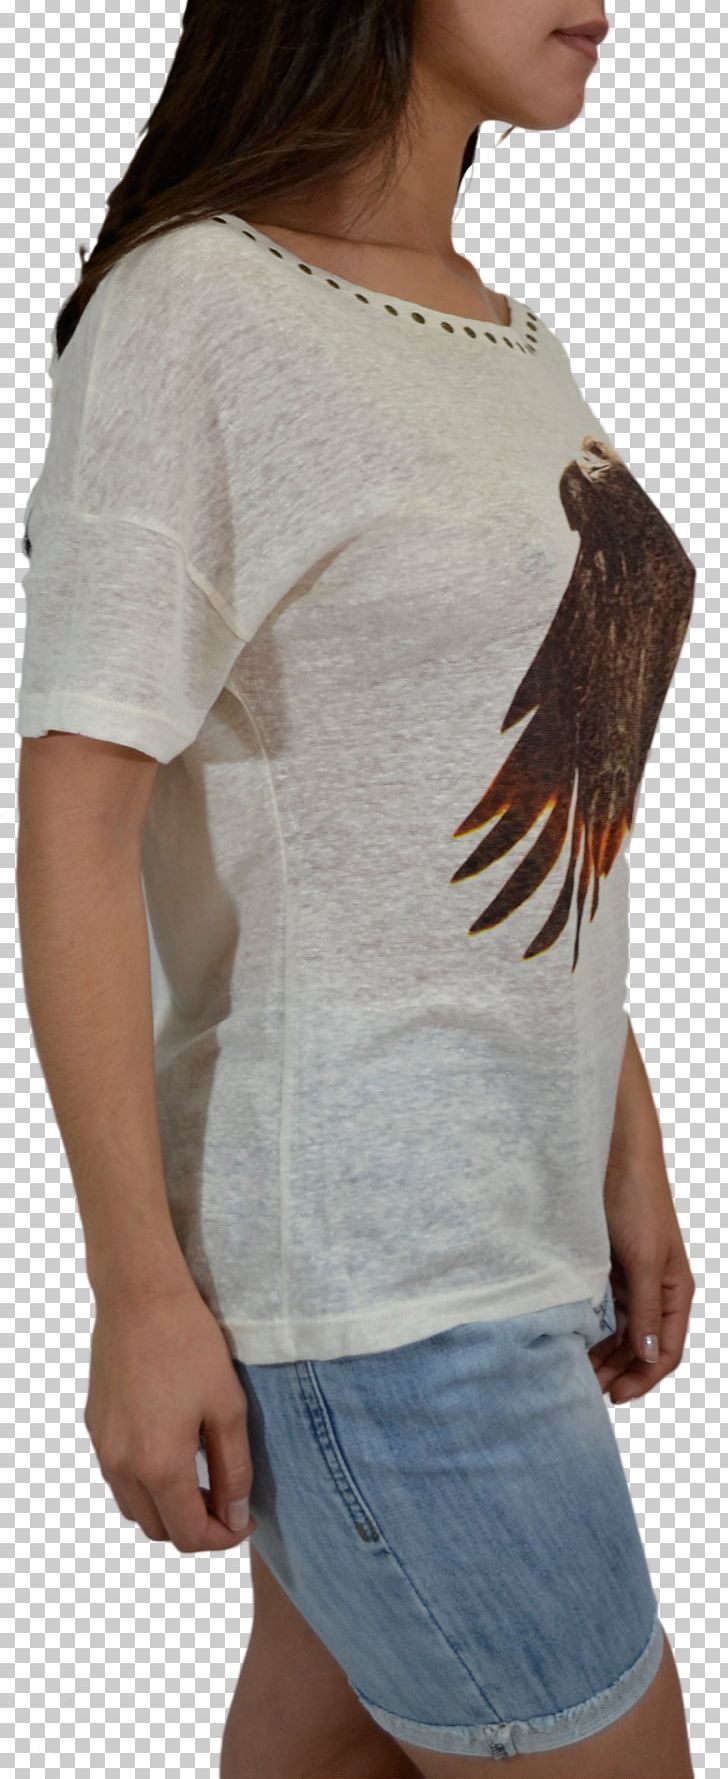 Blouse Sleeve T-shirt Shoulder Flax PNG, Clipart, Beach, Beige, Blouse, Clothing, Eagle Free PNG Download